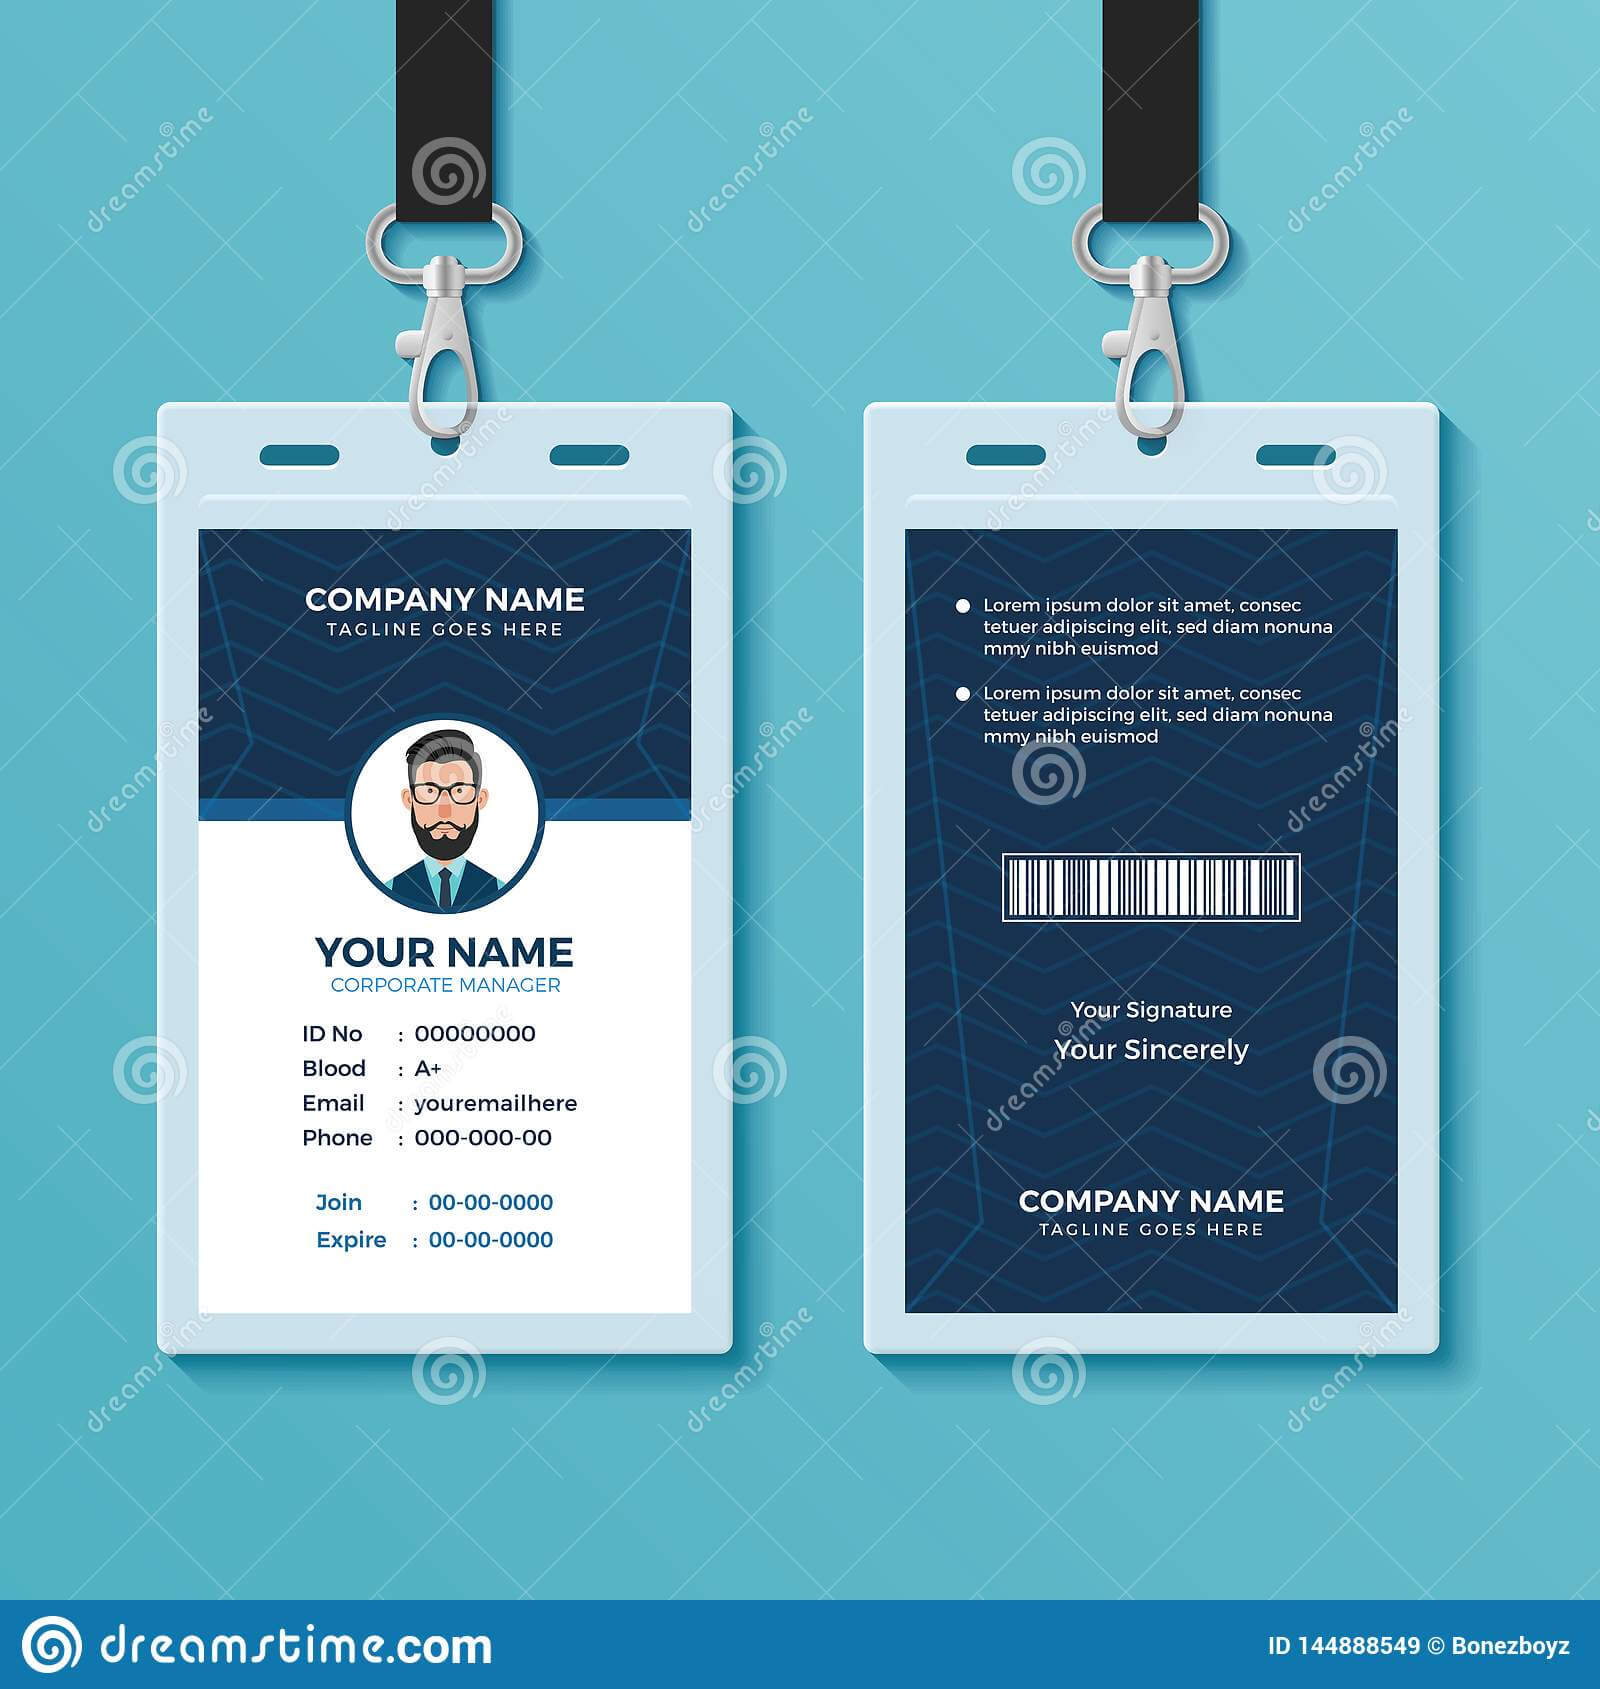 Modern And Clean Id Card Design Template Stock Vector In Company Id Card Design Template